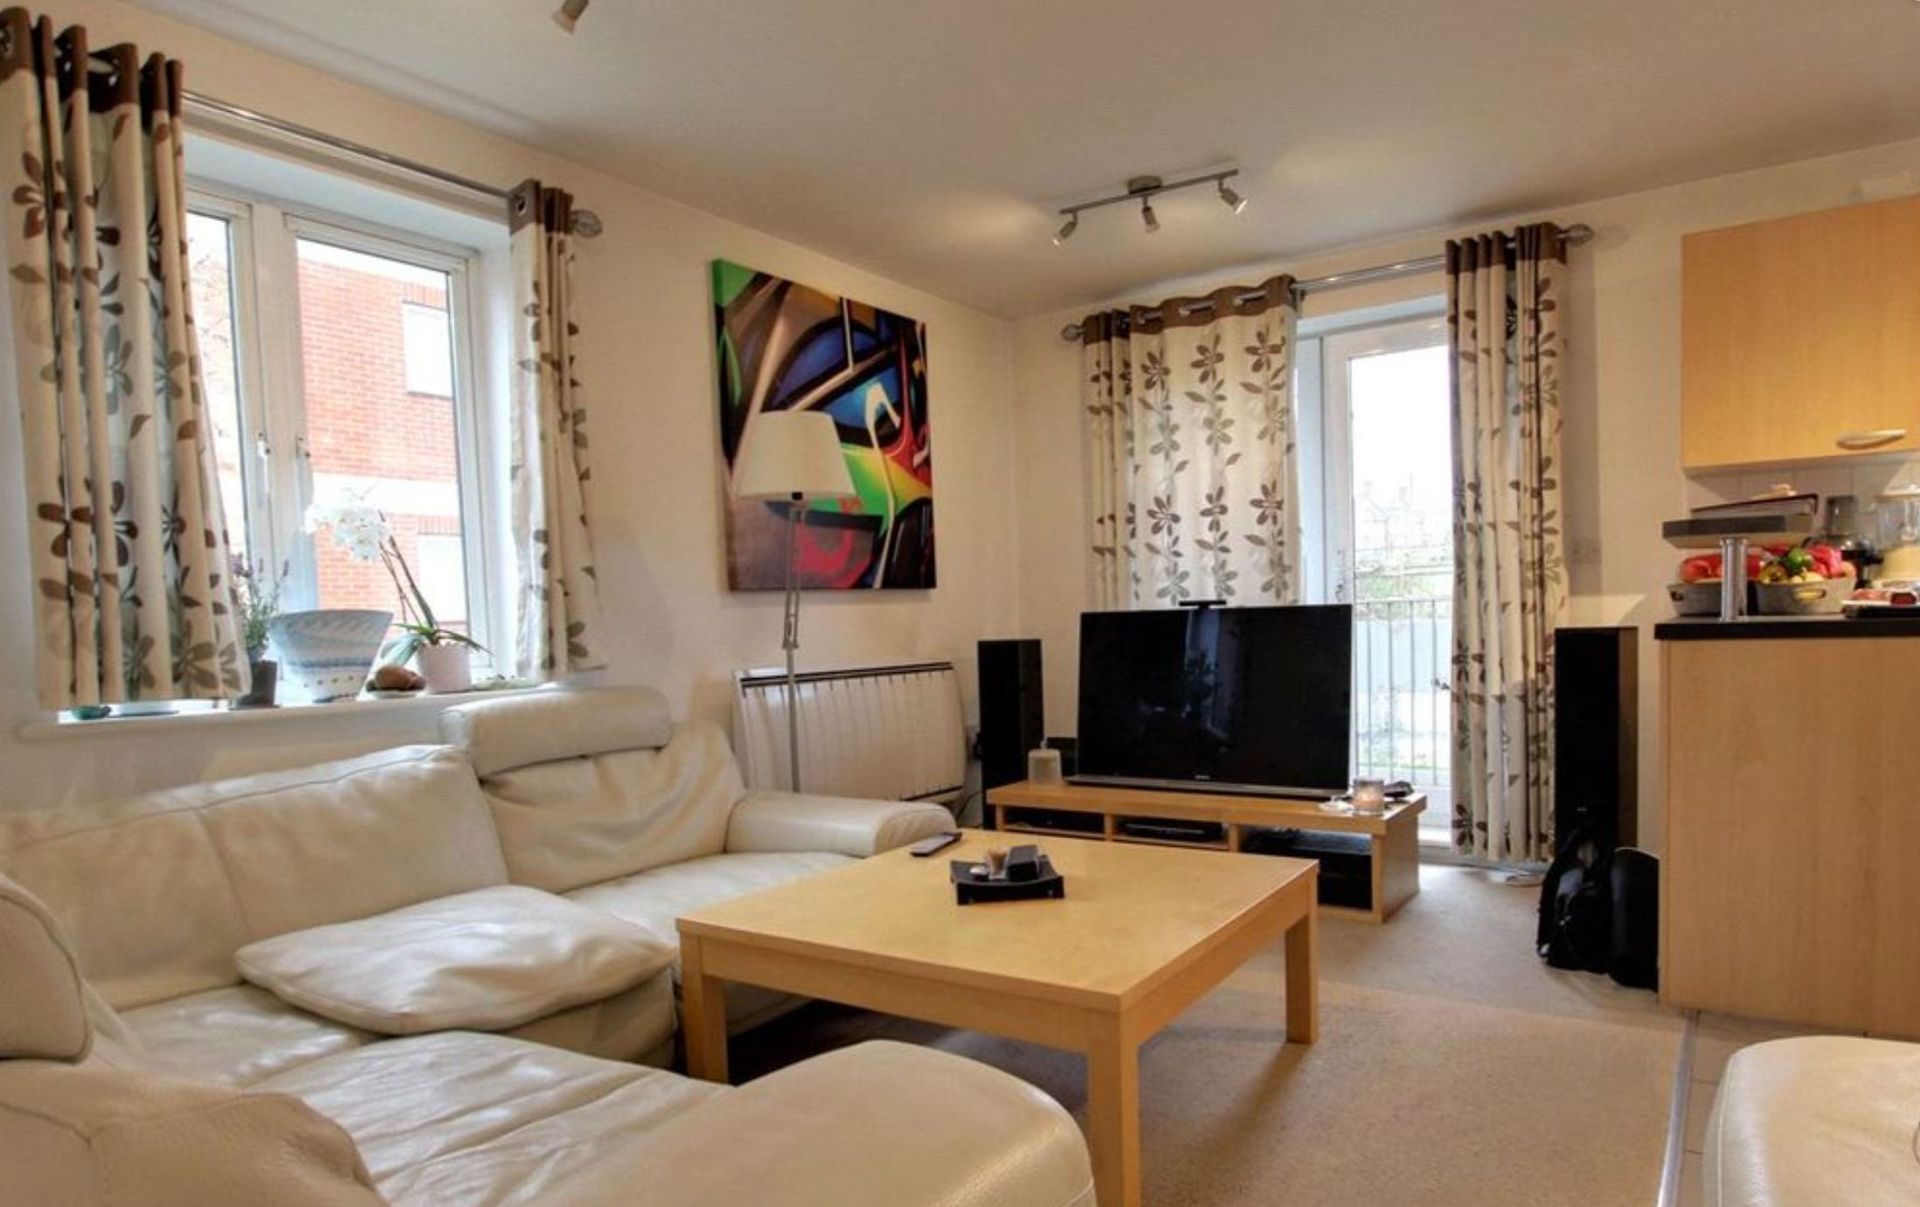 2 bed 2 bath flat to rent in reading